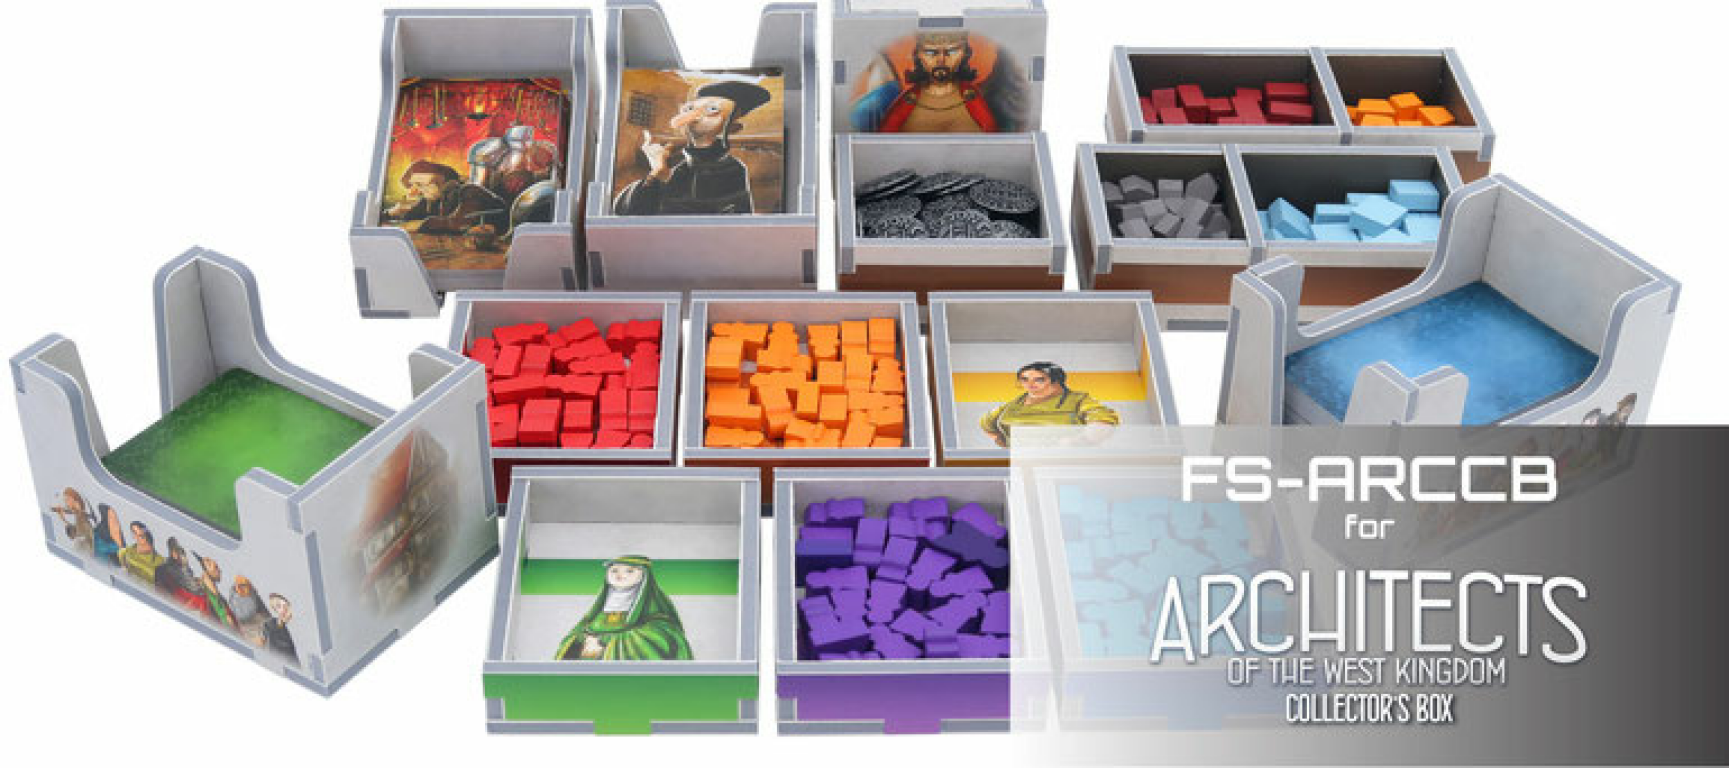 Architects of the West Kingdom Collector's Box: Folded Space Insert components